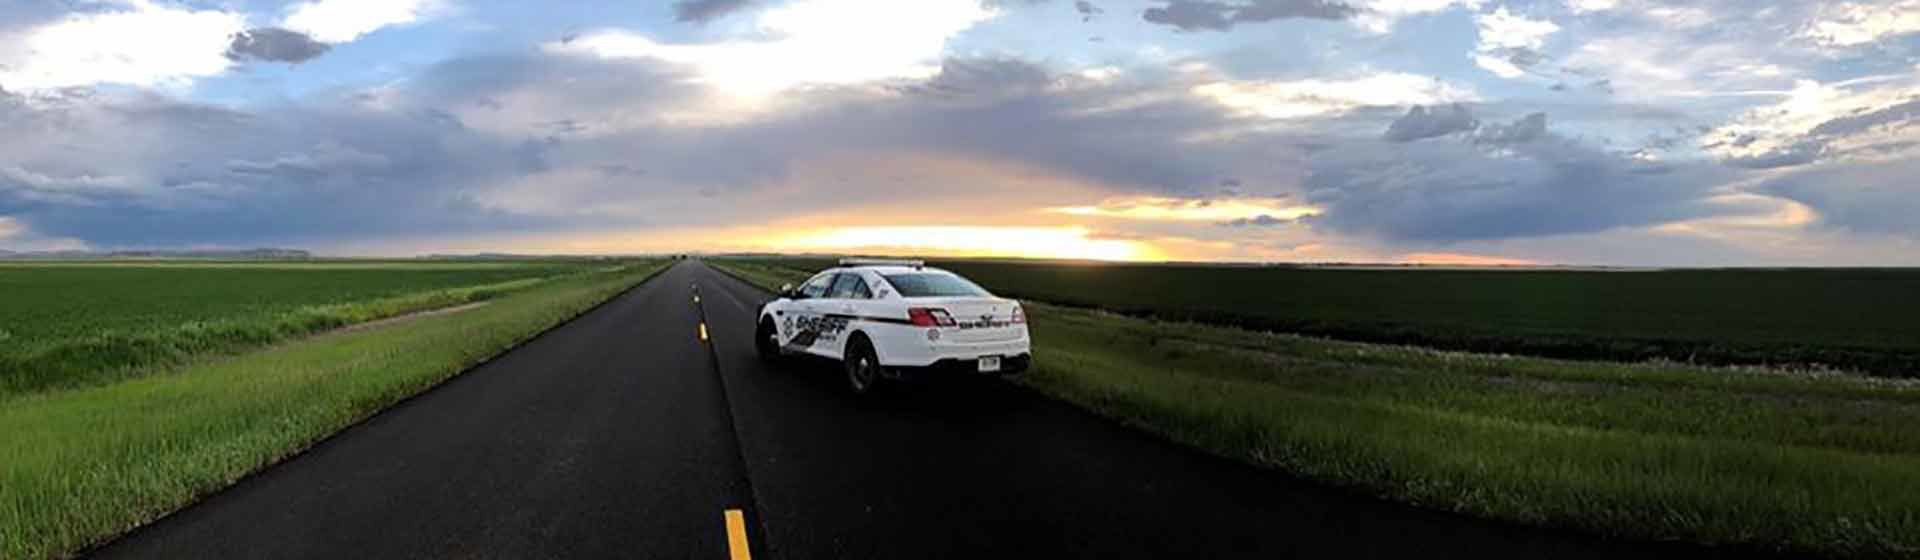 Sheriff car on the open road